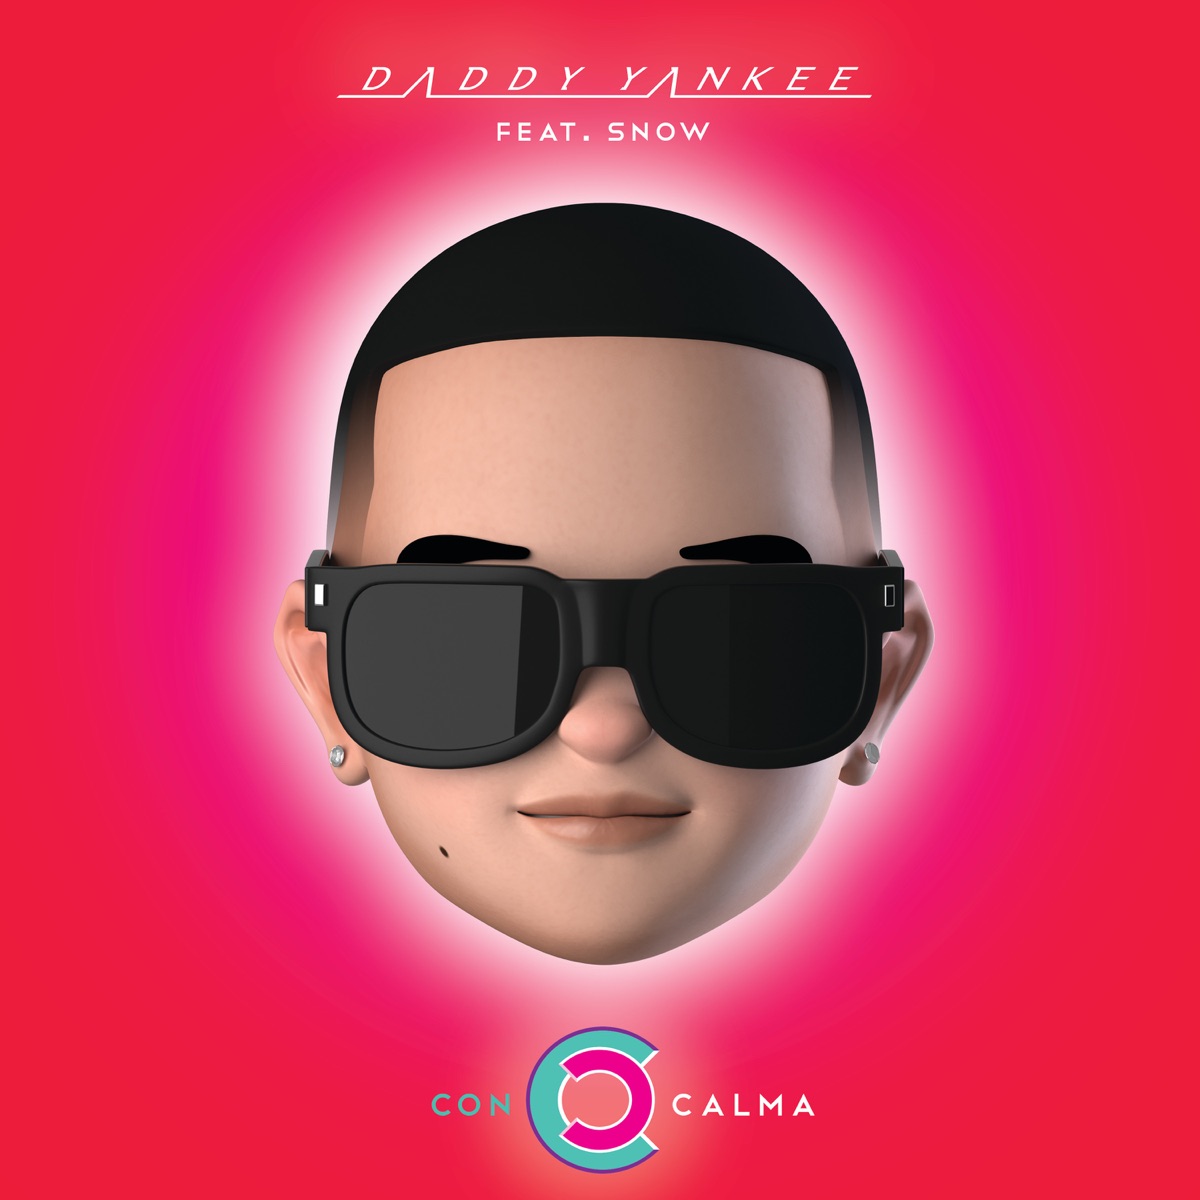 2K20, Pt. 3 (Live) by Daddy Yankee on Apple Music